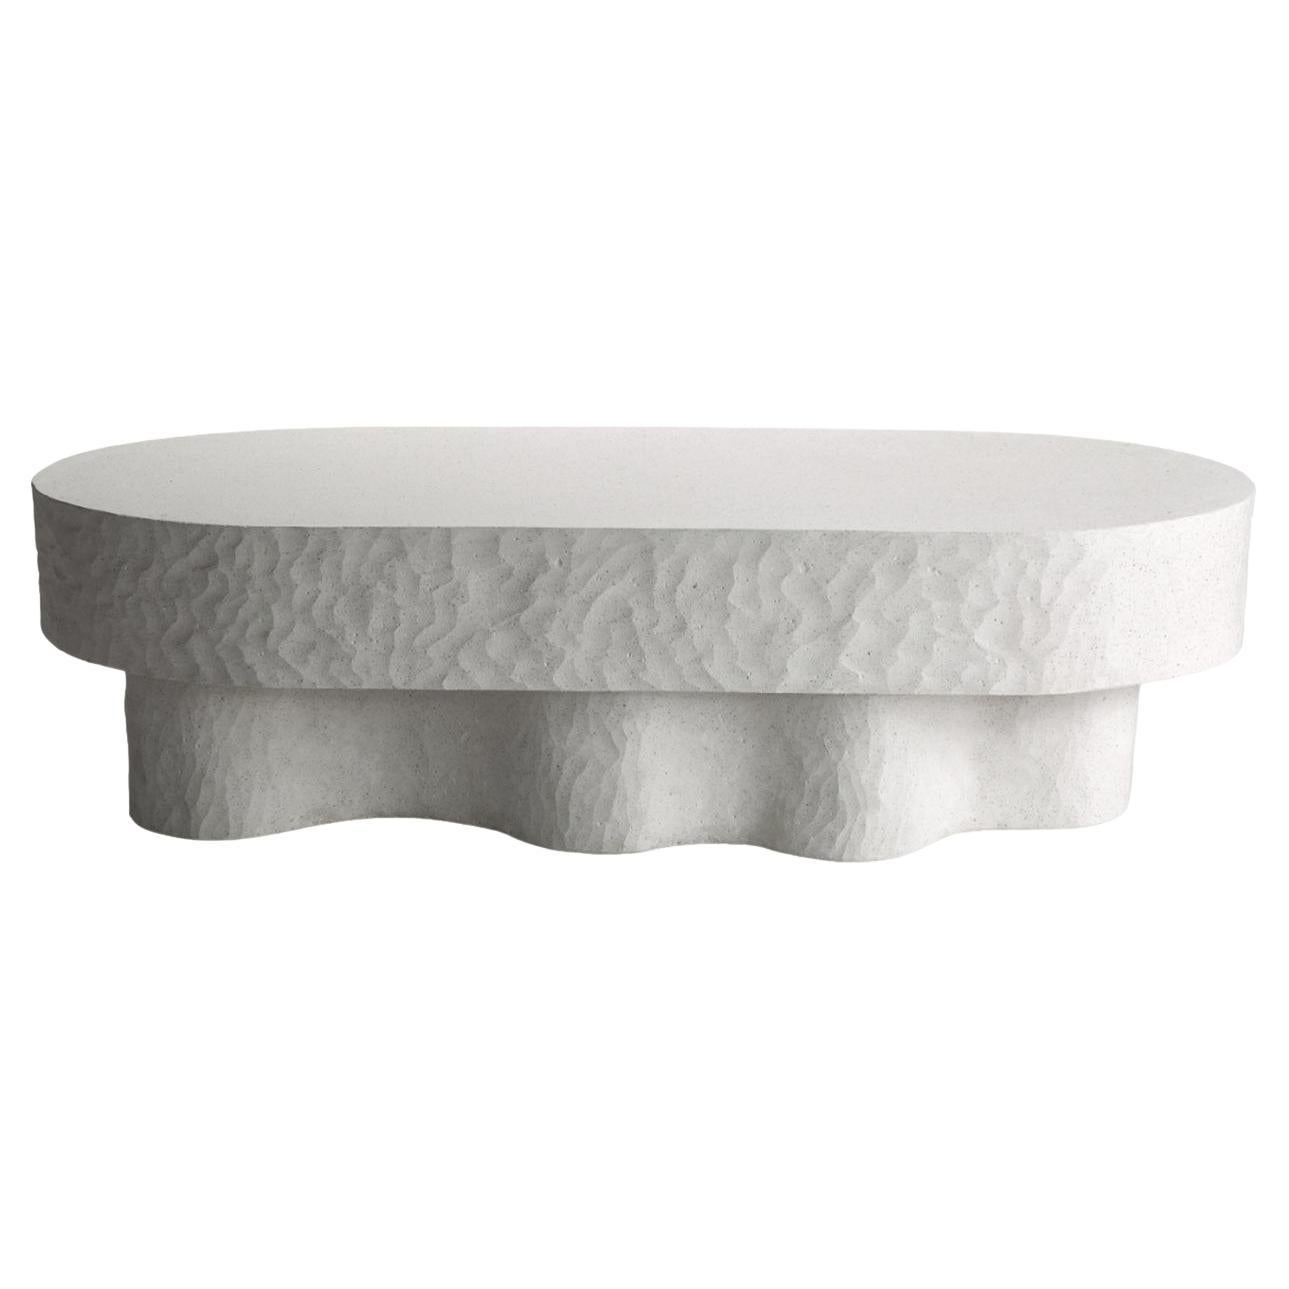 Hand Sculpted Bench / Table 'MEDUSA' in white cast stone by Alentes Atelier For Sale